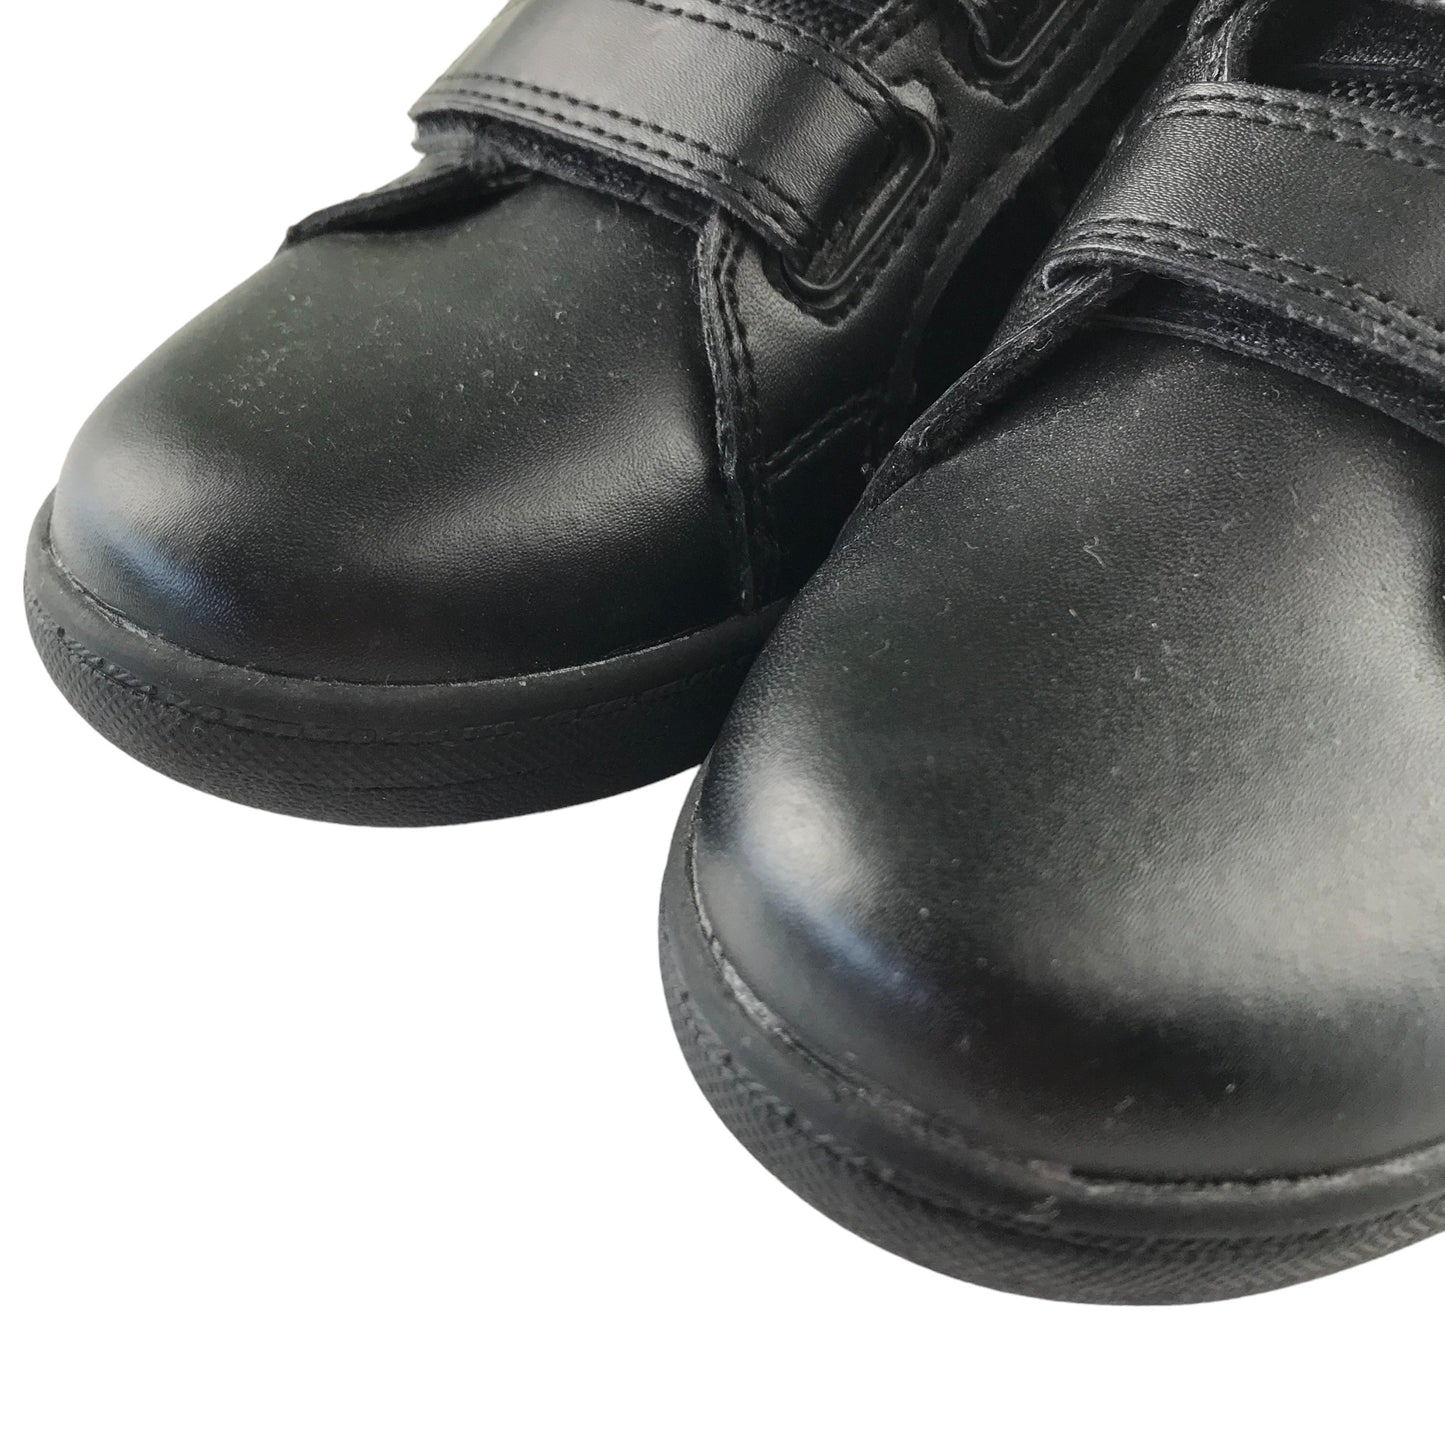 George Trainers Shoe Size 1 Black Leather-style School Shoes with Straps